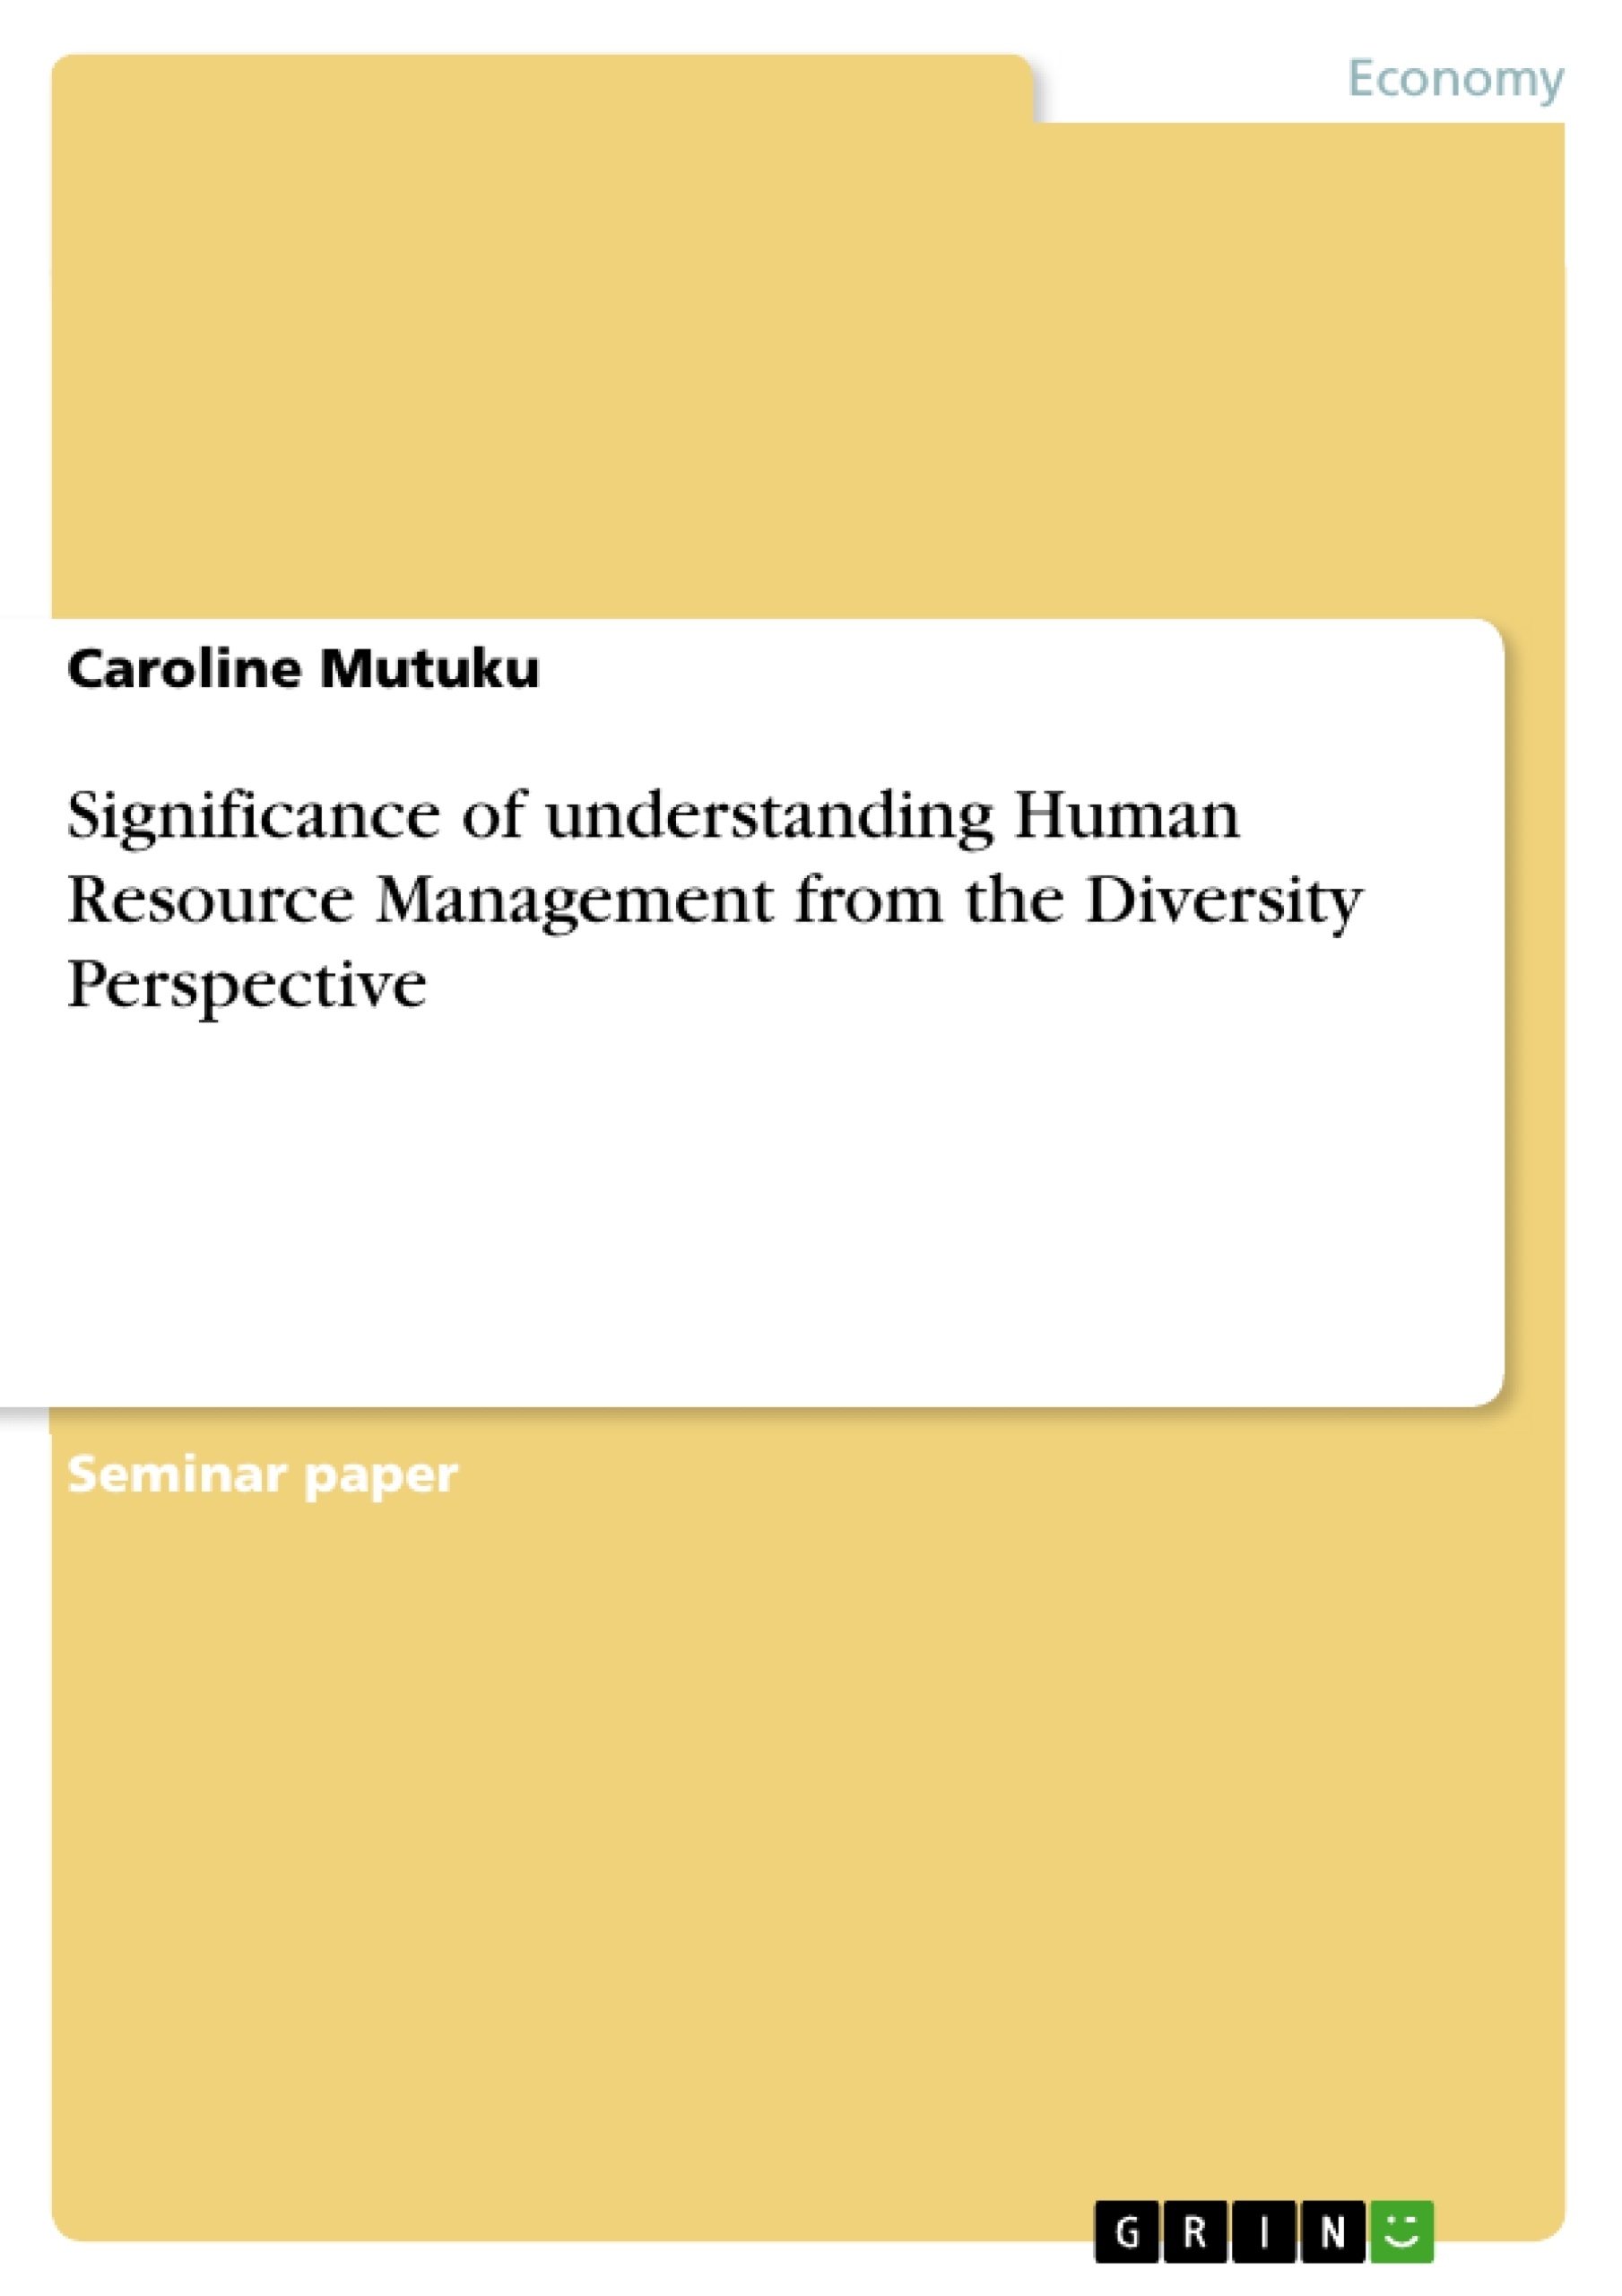 Título: Significance of understanding Human Resource Management from the Diversity Perspective